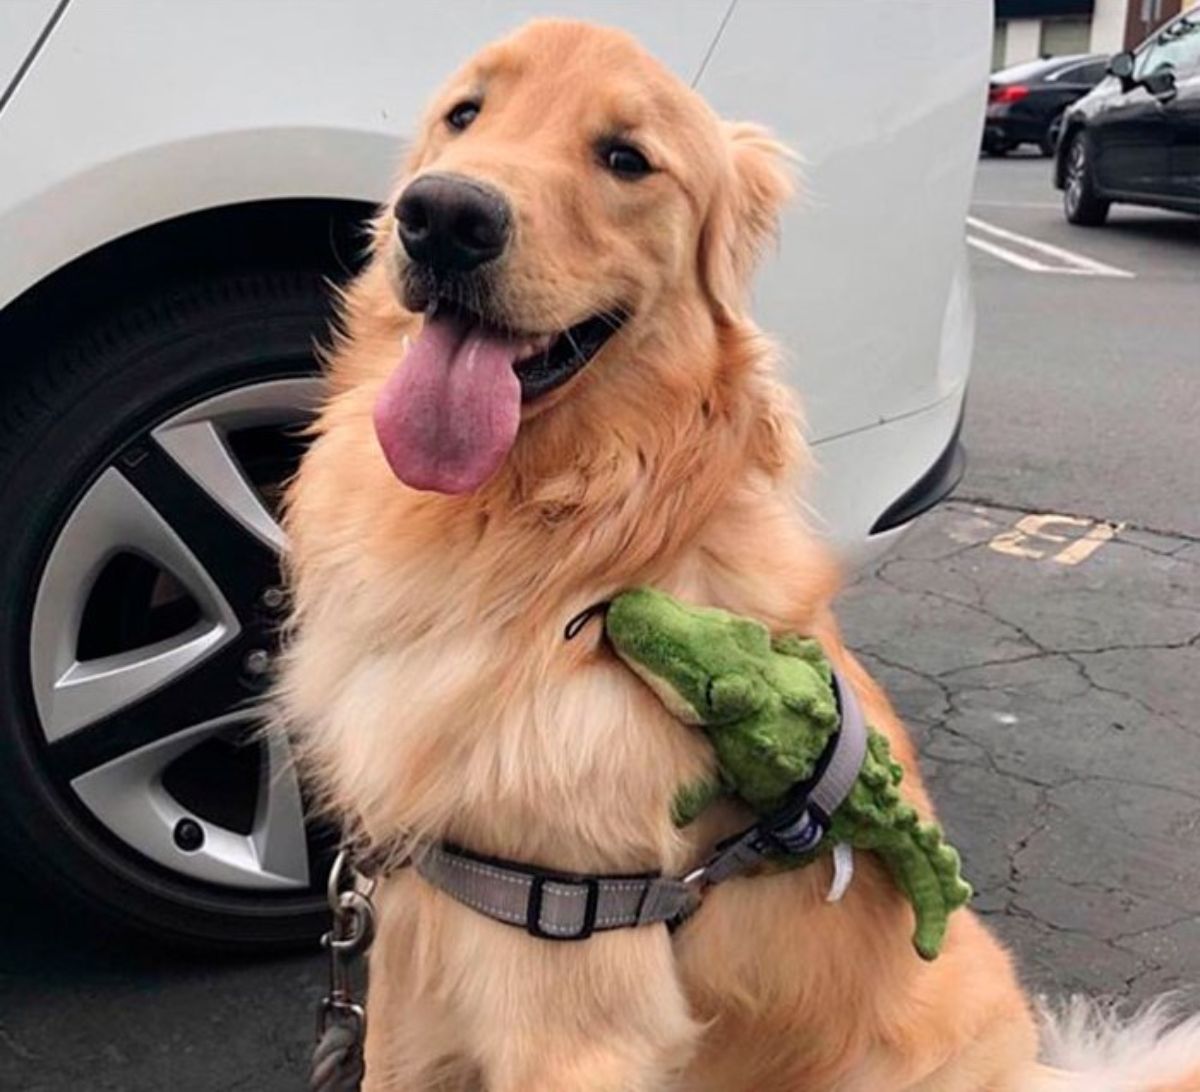 golden retriever with a grey harness on that has a green alligator stuffed toy stuck in it